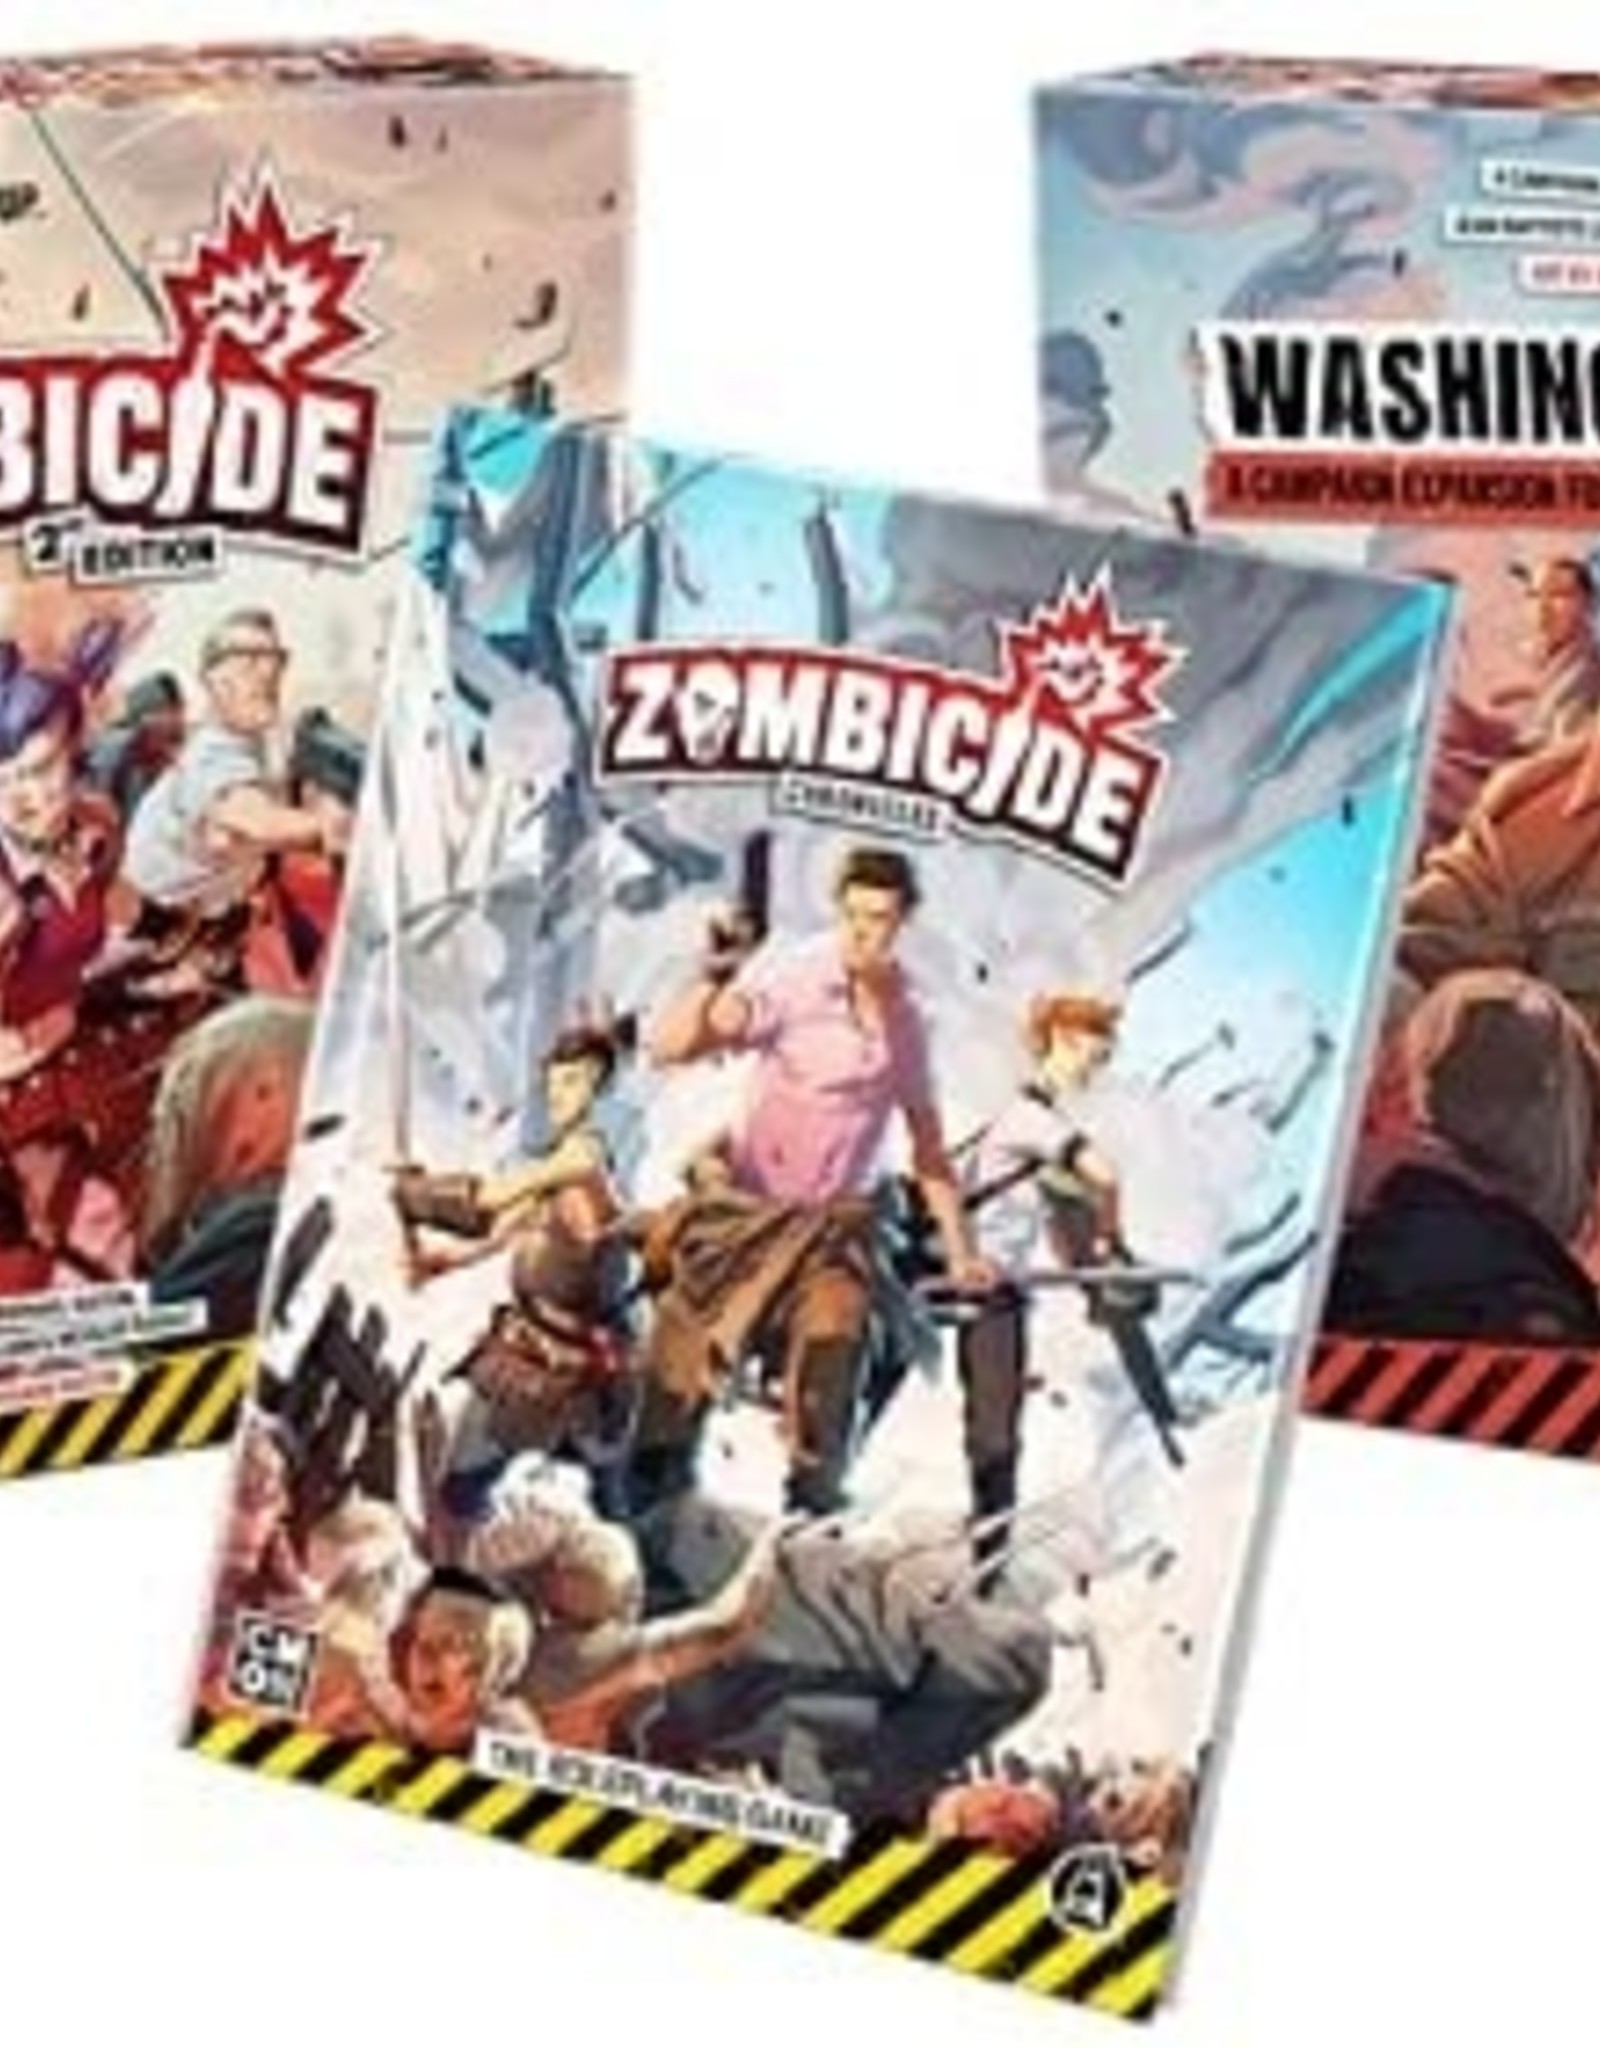 guillotine games Zombicide Chronicles Stories From The Outbreak Mission Compendium